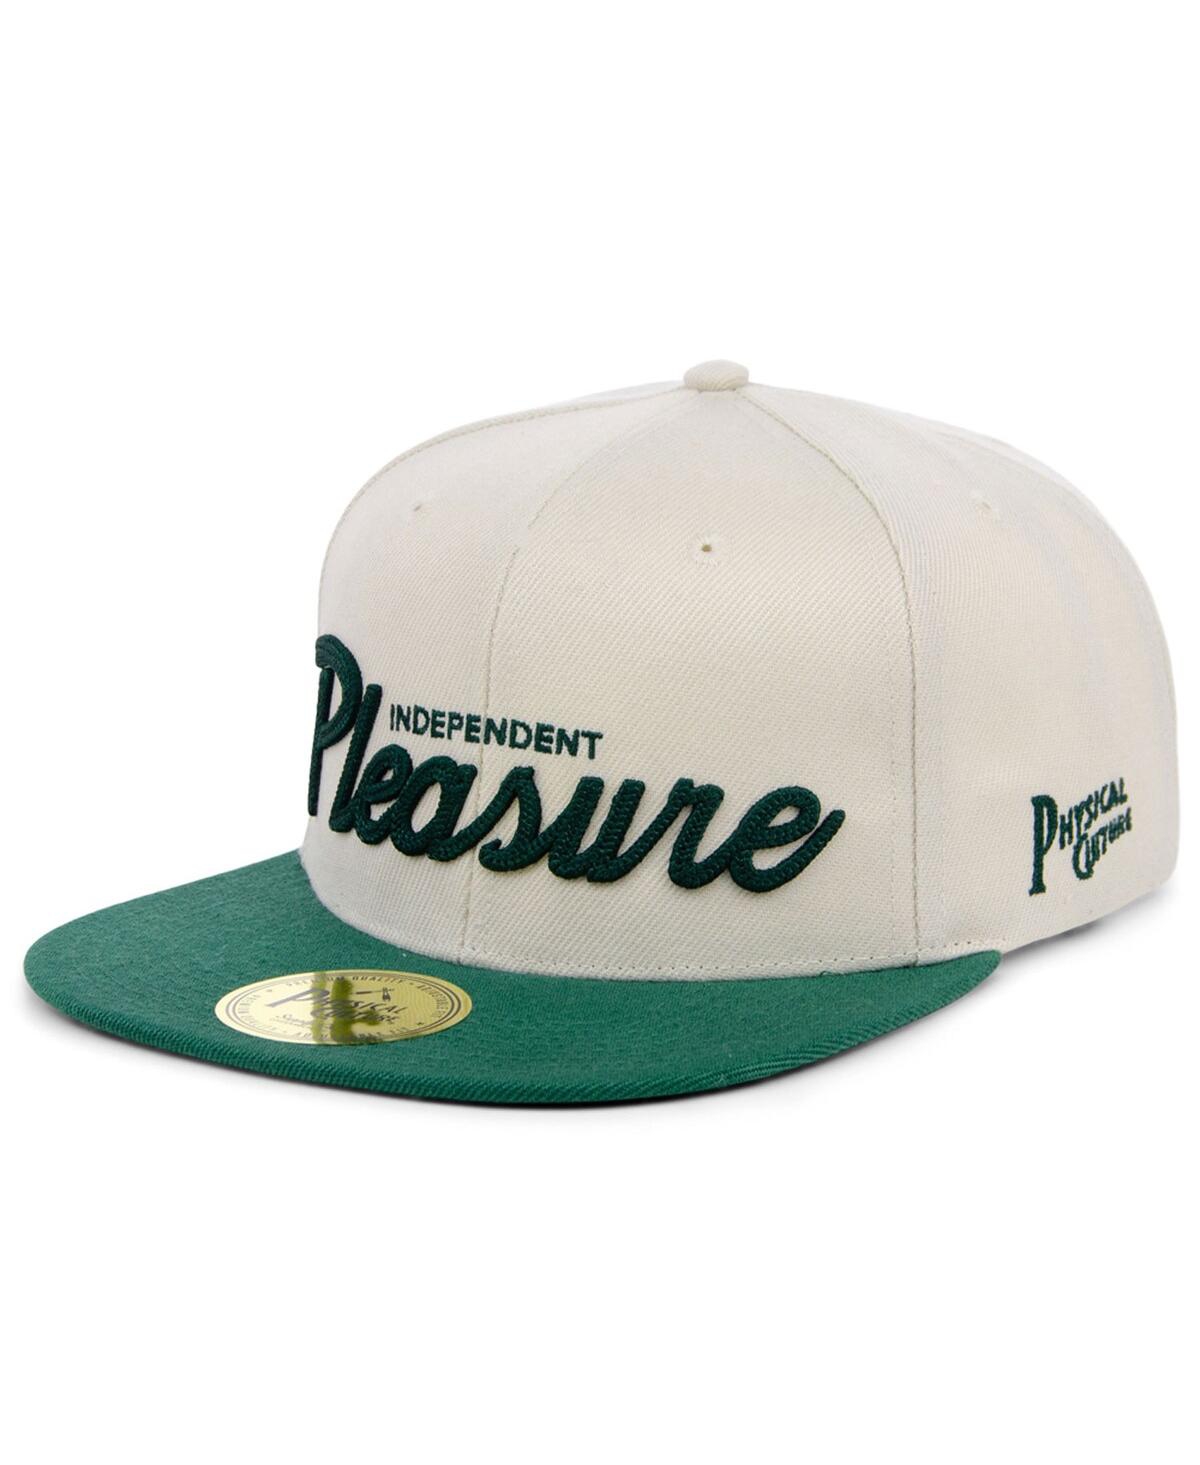 Shop Physical Culture Men's  Cream Independent Pleasure Club Of New Jersey Black Fives Snapback Adjustable